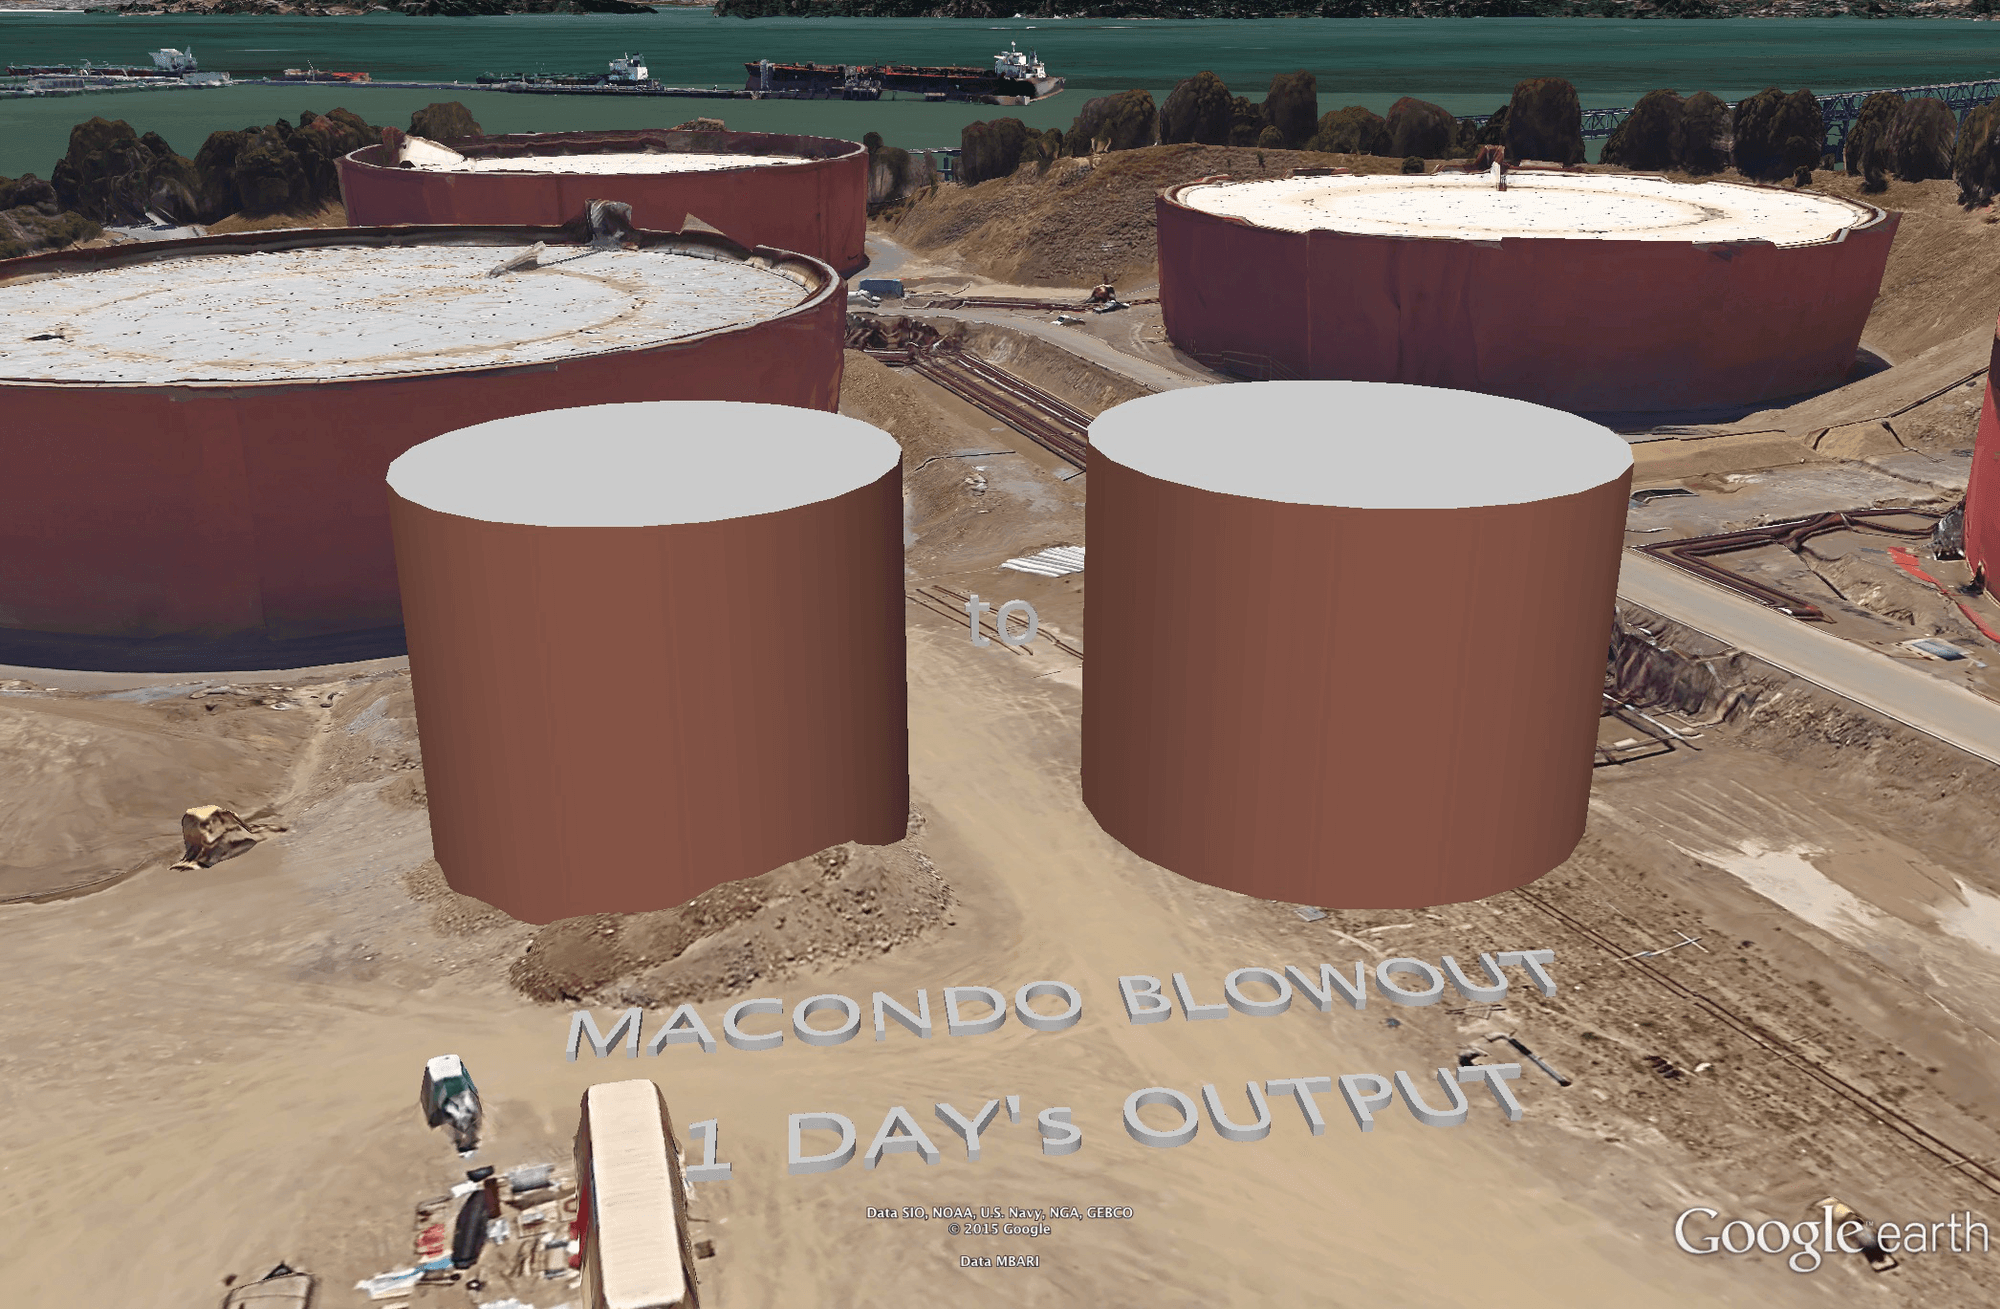 One day's output from the Macondo wellhead blowout would have filled a hypothetical tank the same height (19.6m or 64 ft) but 24 to 27 meters (80 to 88 ft) in diameter.